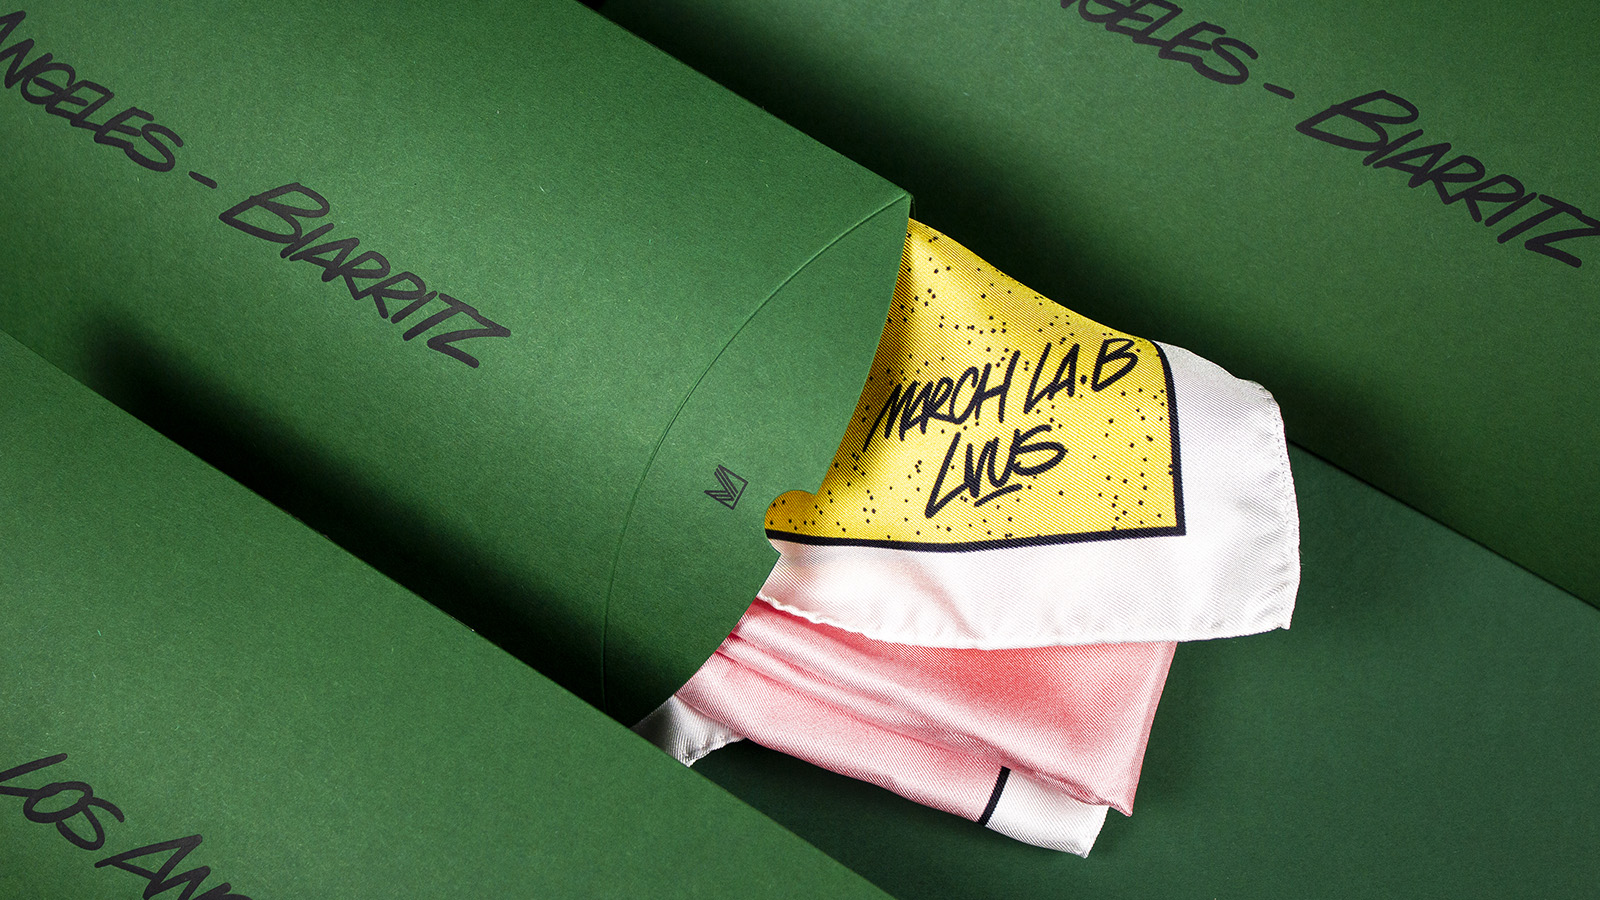 Etuis foulards luxe - Packaging et emballage pour la mode - Printed by Atelier Bulk